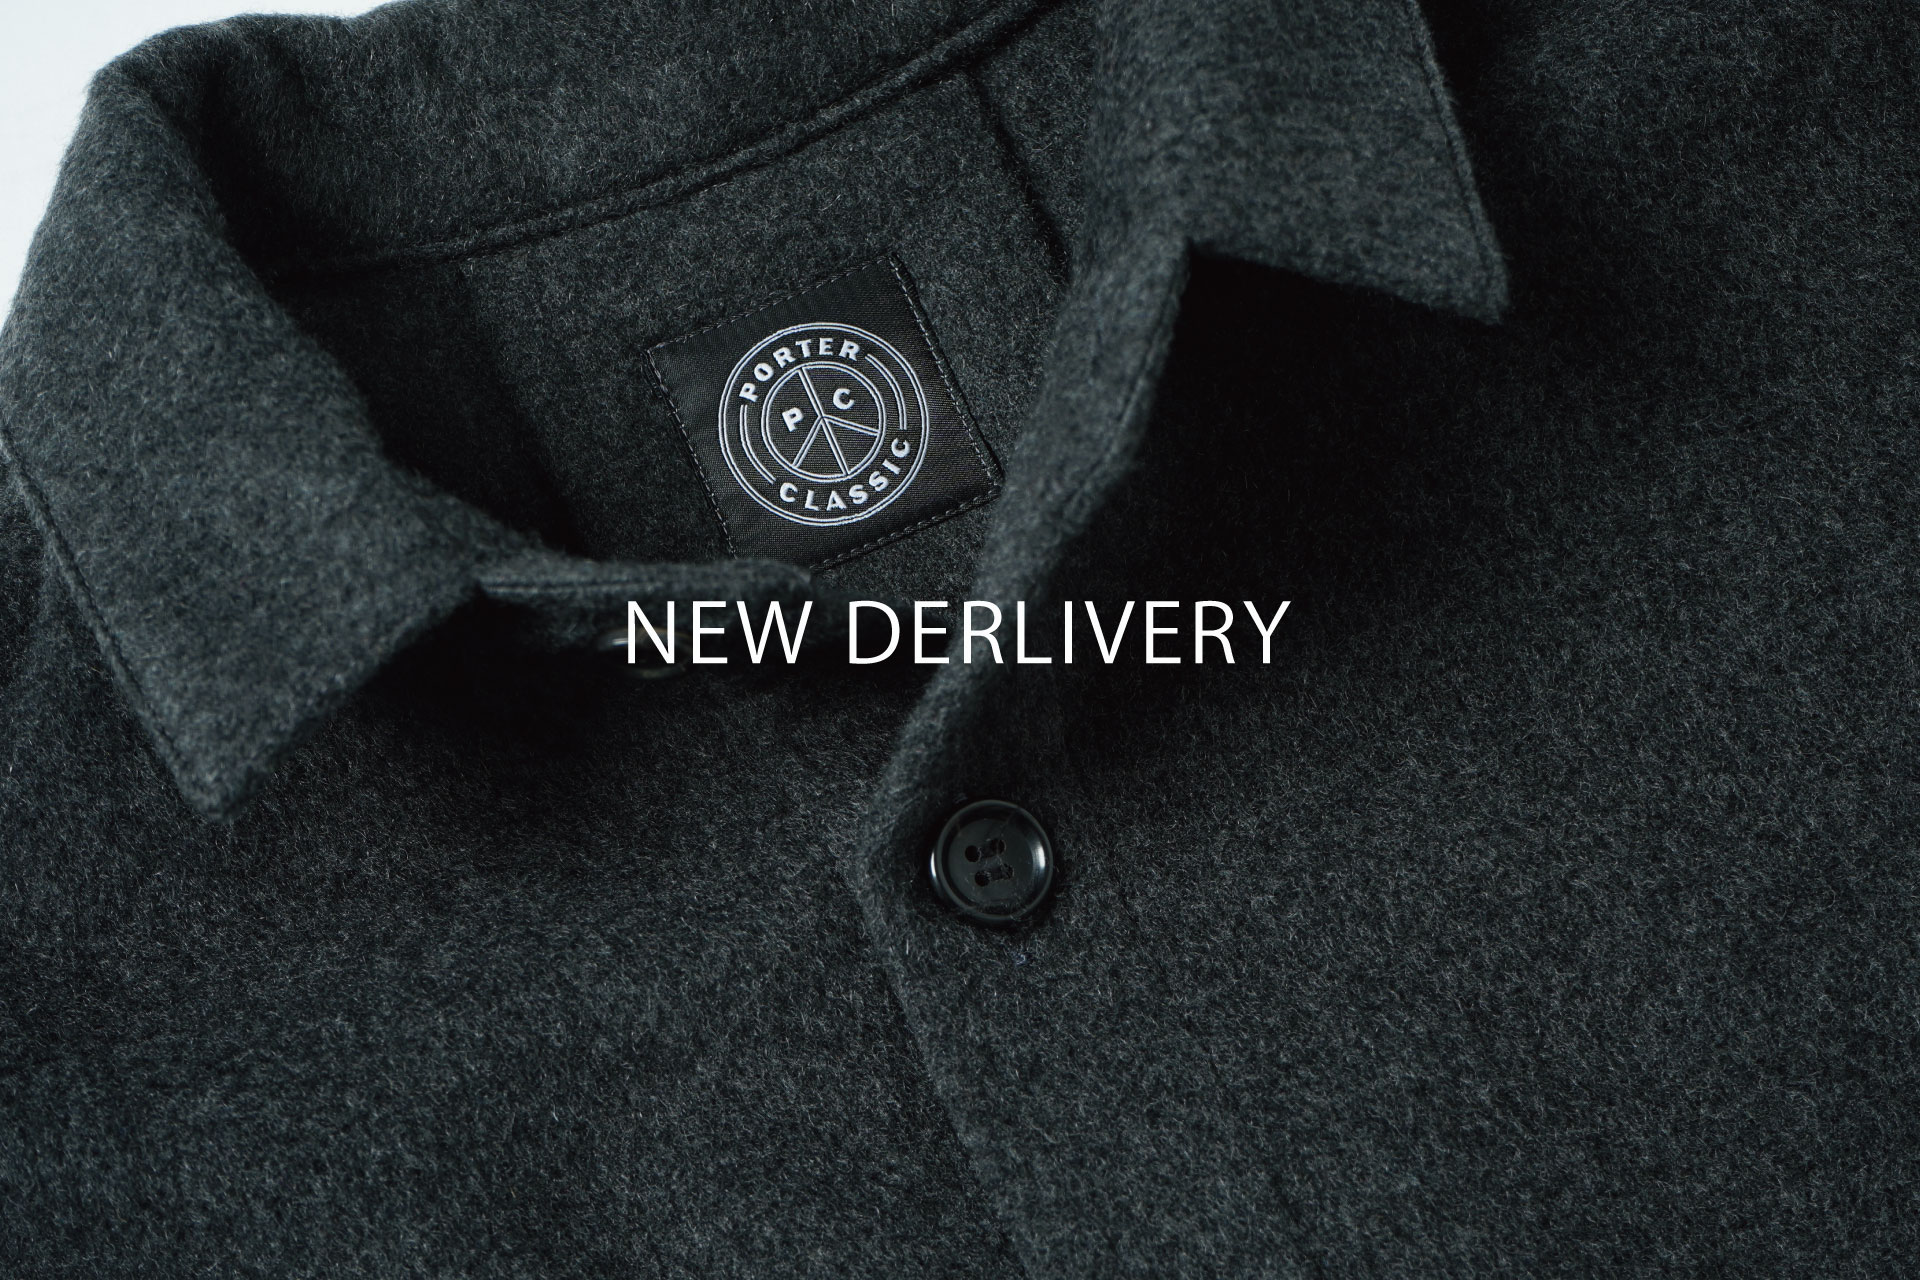 PORTER CLASSIC NEW DELIVERY